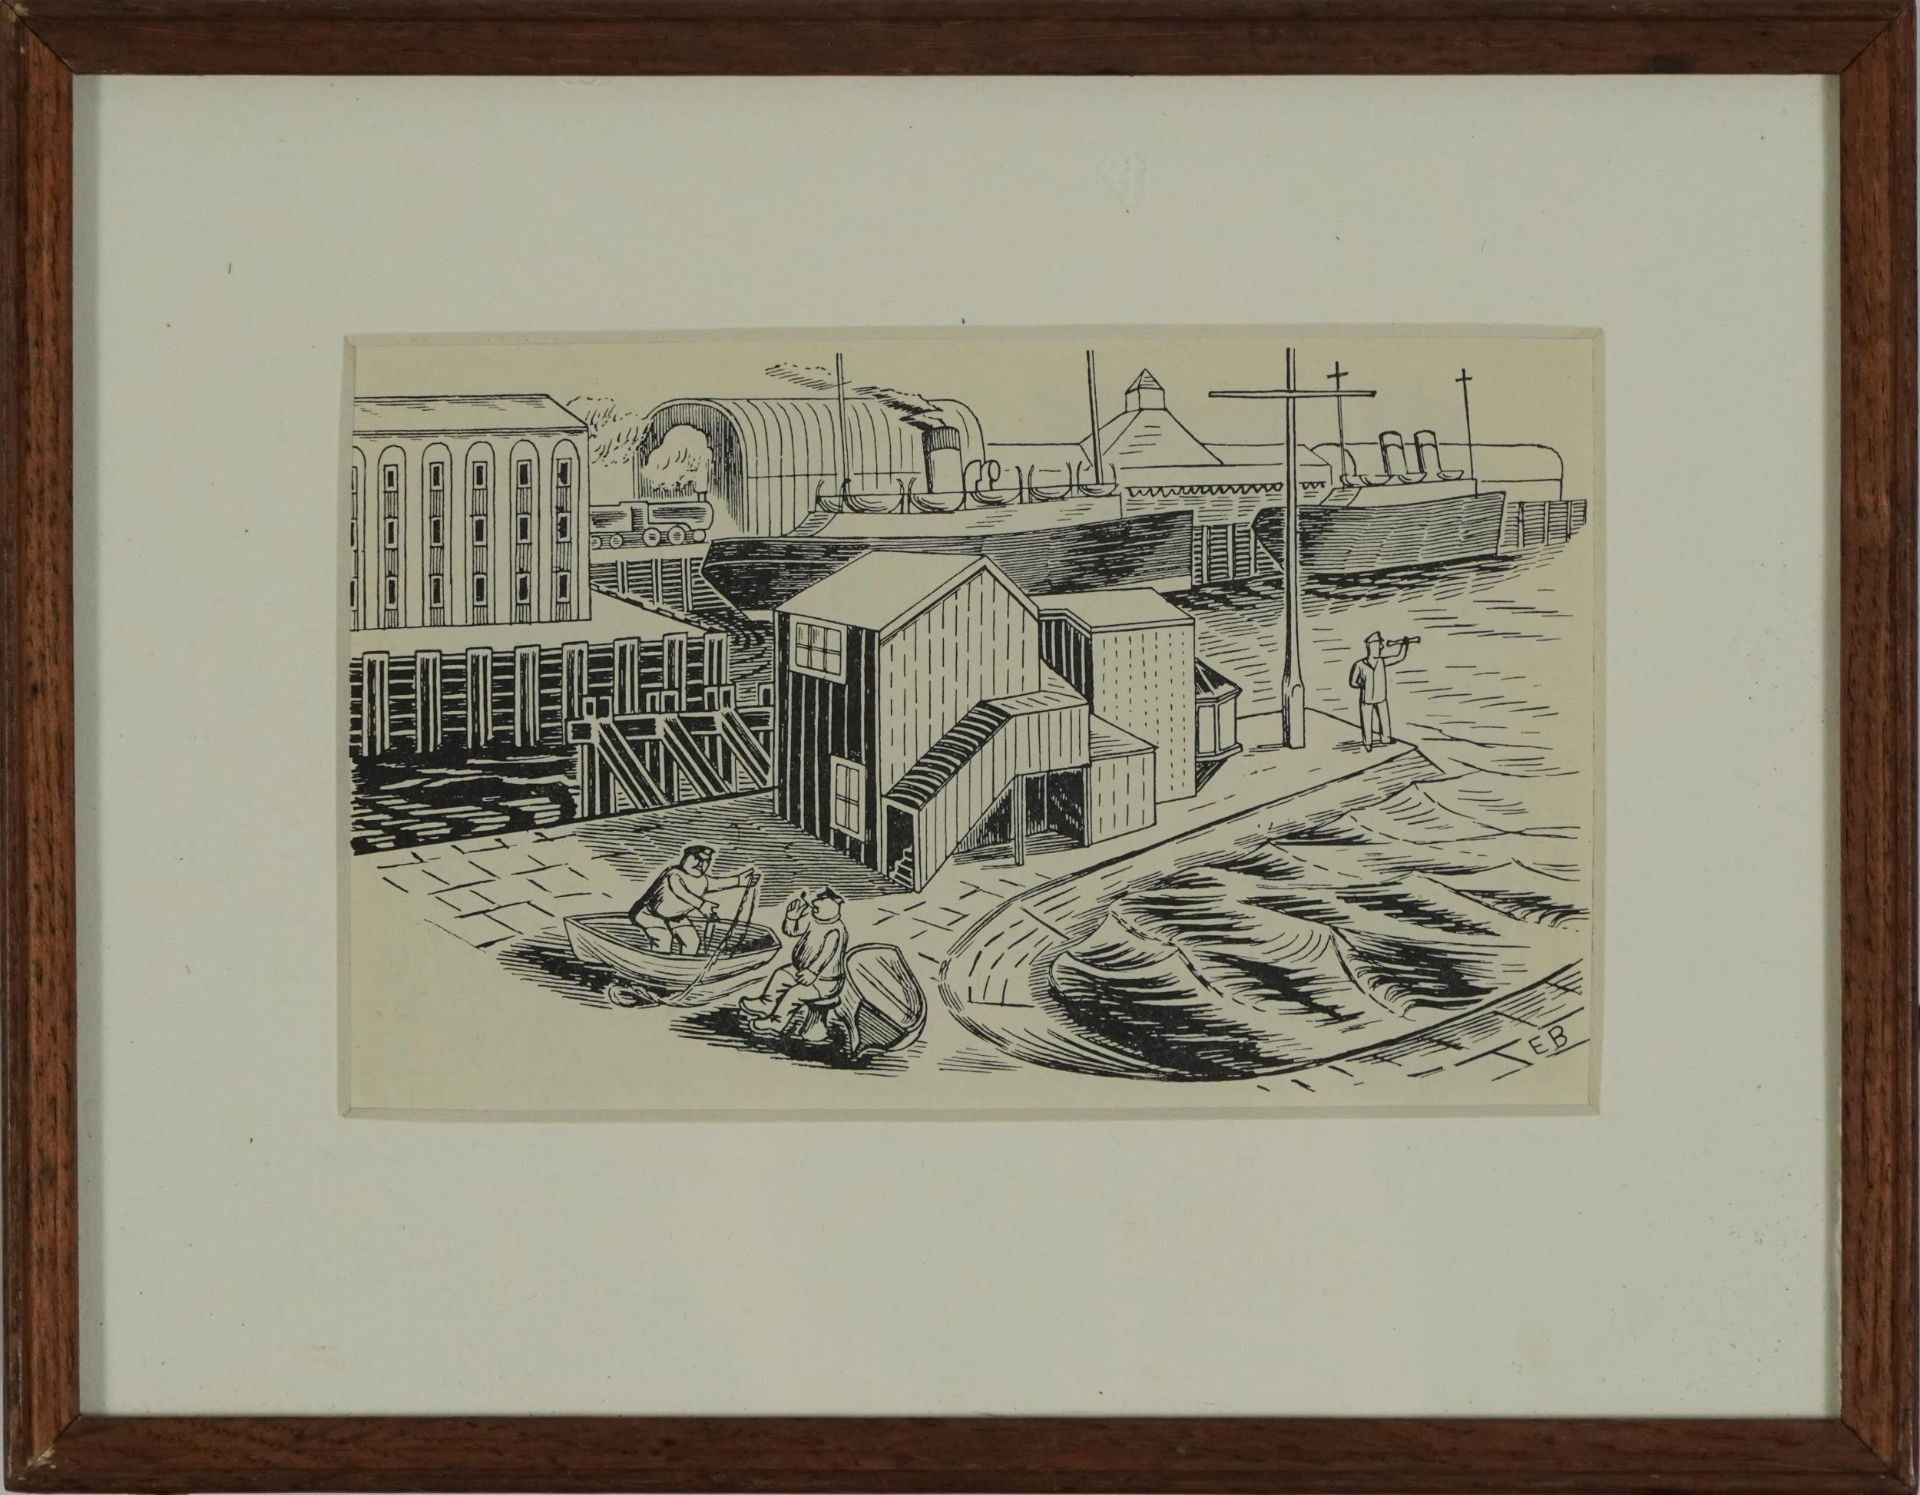 Edward Bawden - Industrial port scene with figures, lithographic print, various inscriptions verso - Image 3 of 10